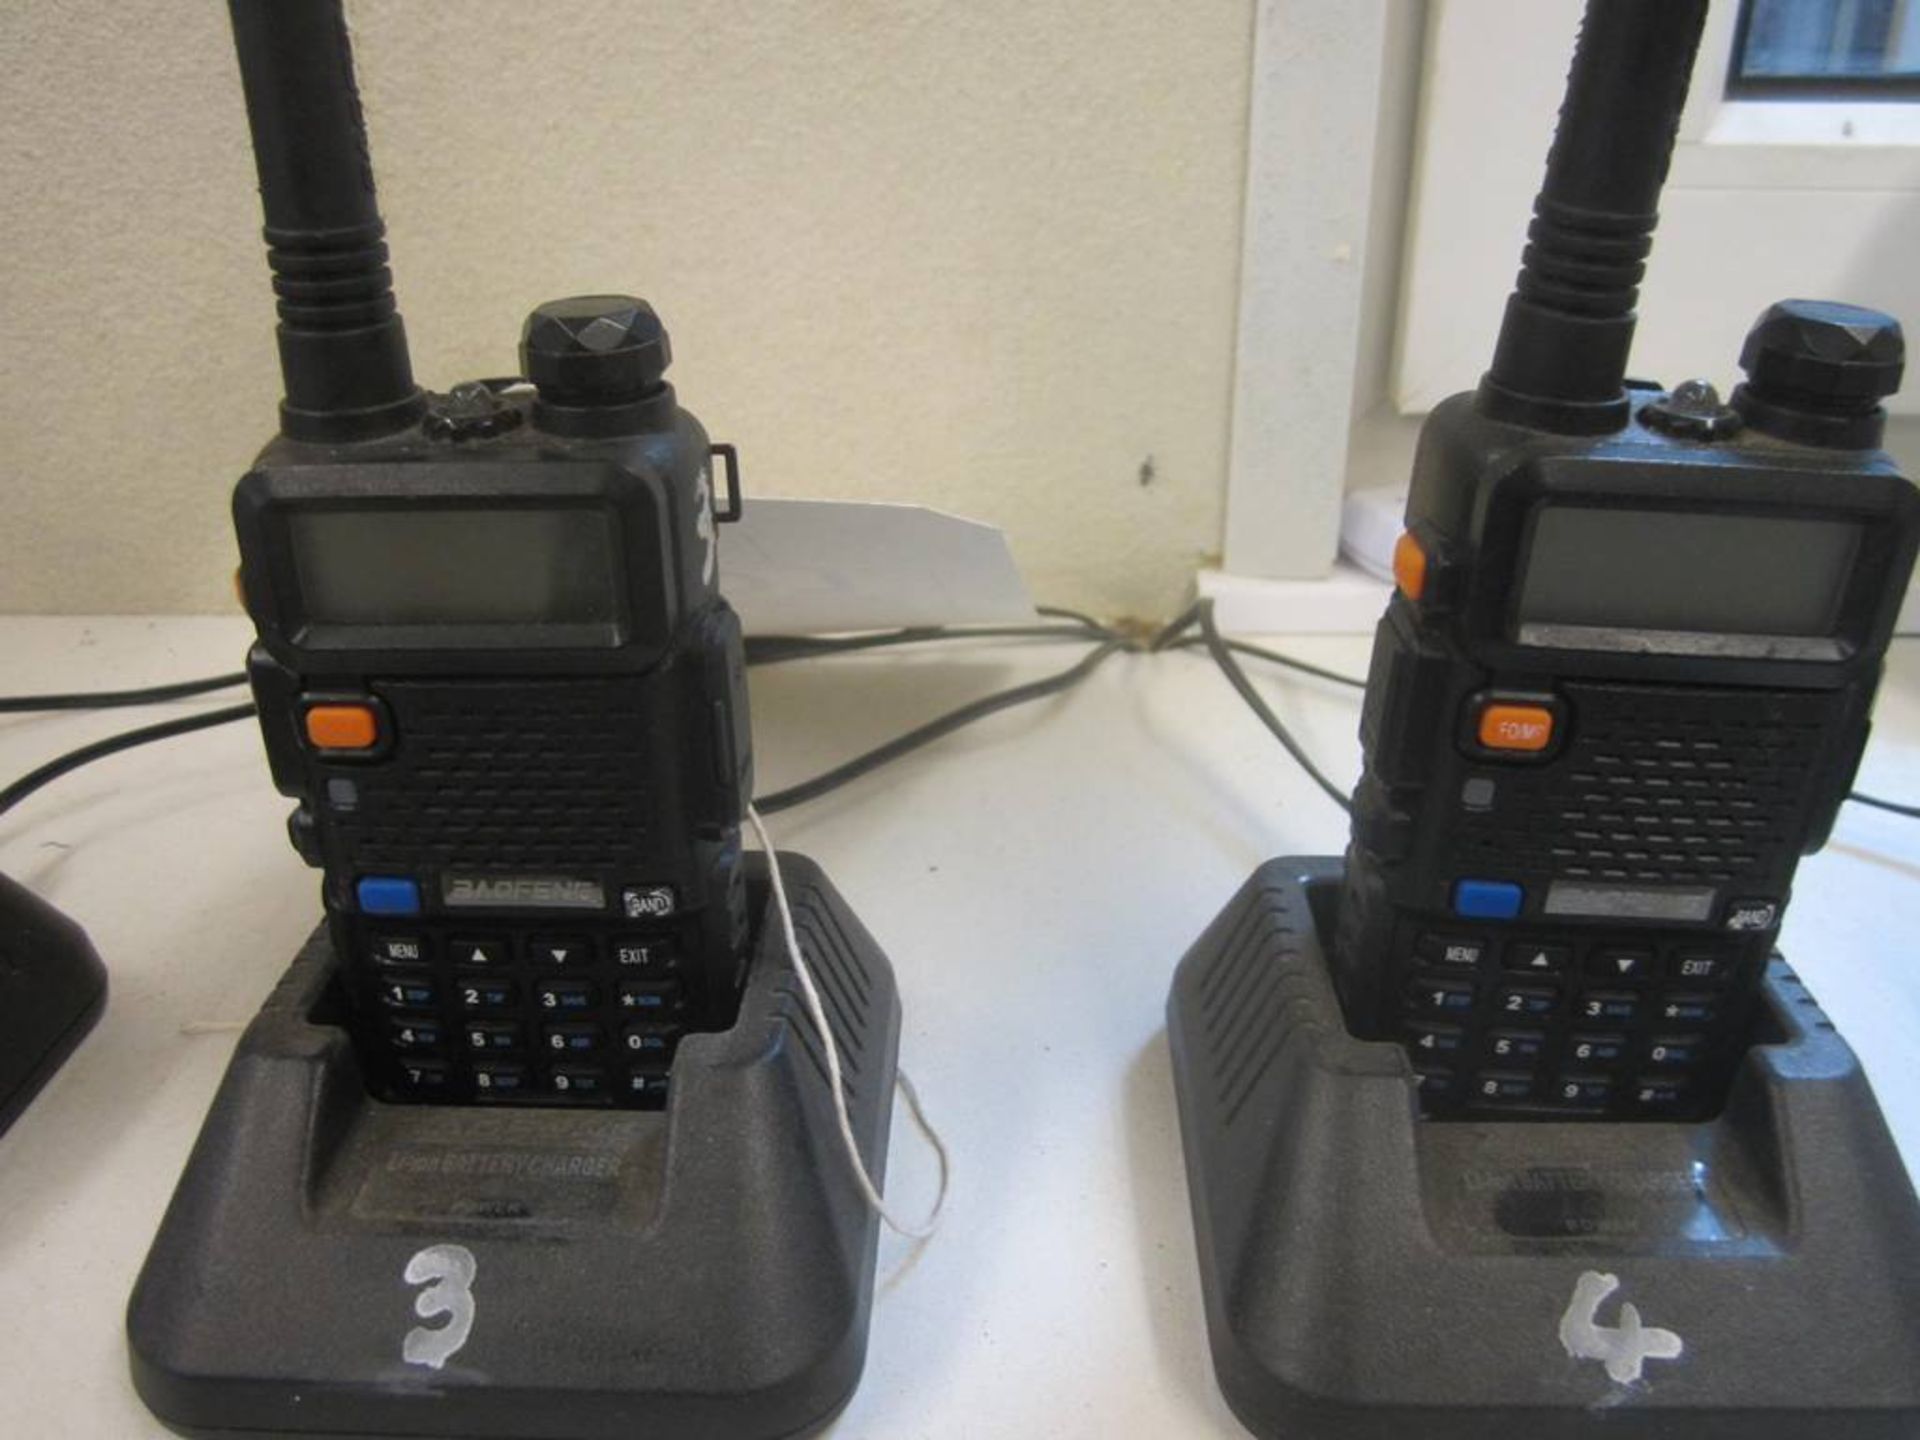 Two Boafeng UV-5R 2-way radio sets and charging stations